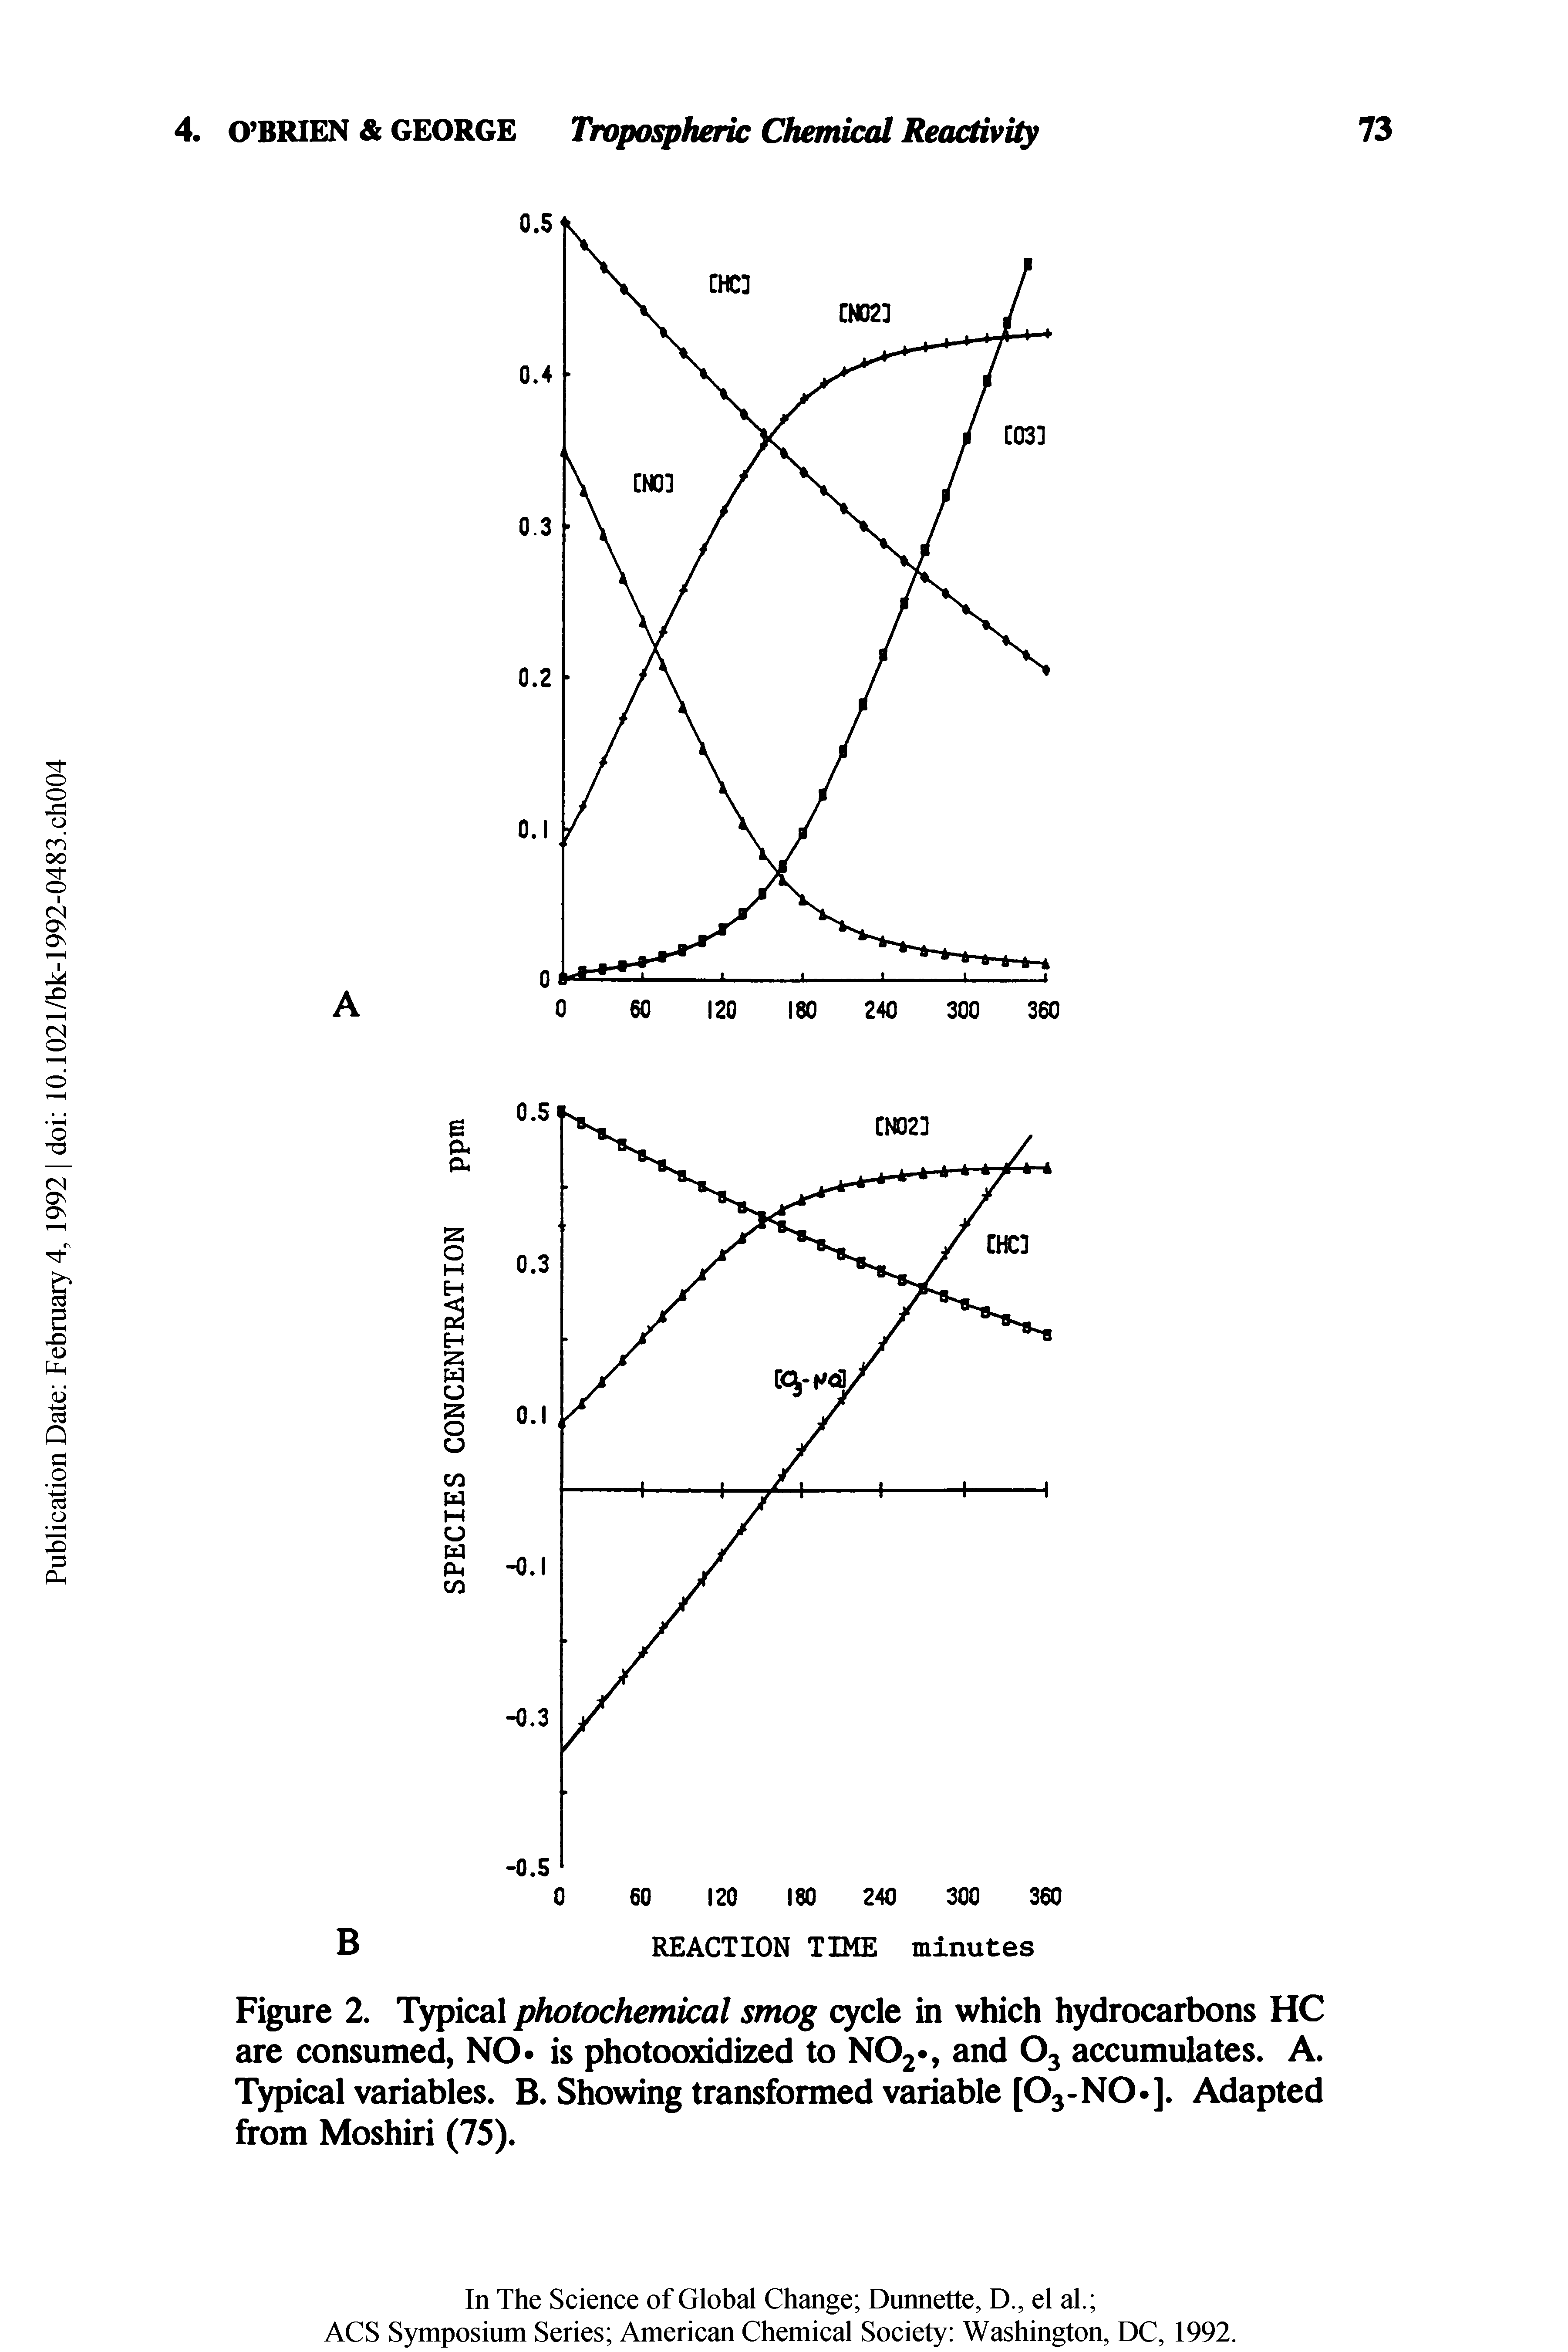 Figure 2. Typical photochemical smog cycle in which hydrocarbons HC are consumed, NO is photooxidized to N02, and O3 accumulates. A. Typical variables. B. Showing transformed variable [03-NO ]. Adapted from Moshiri (75).